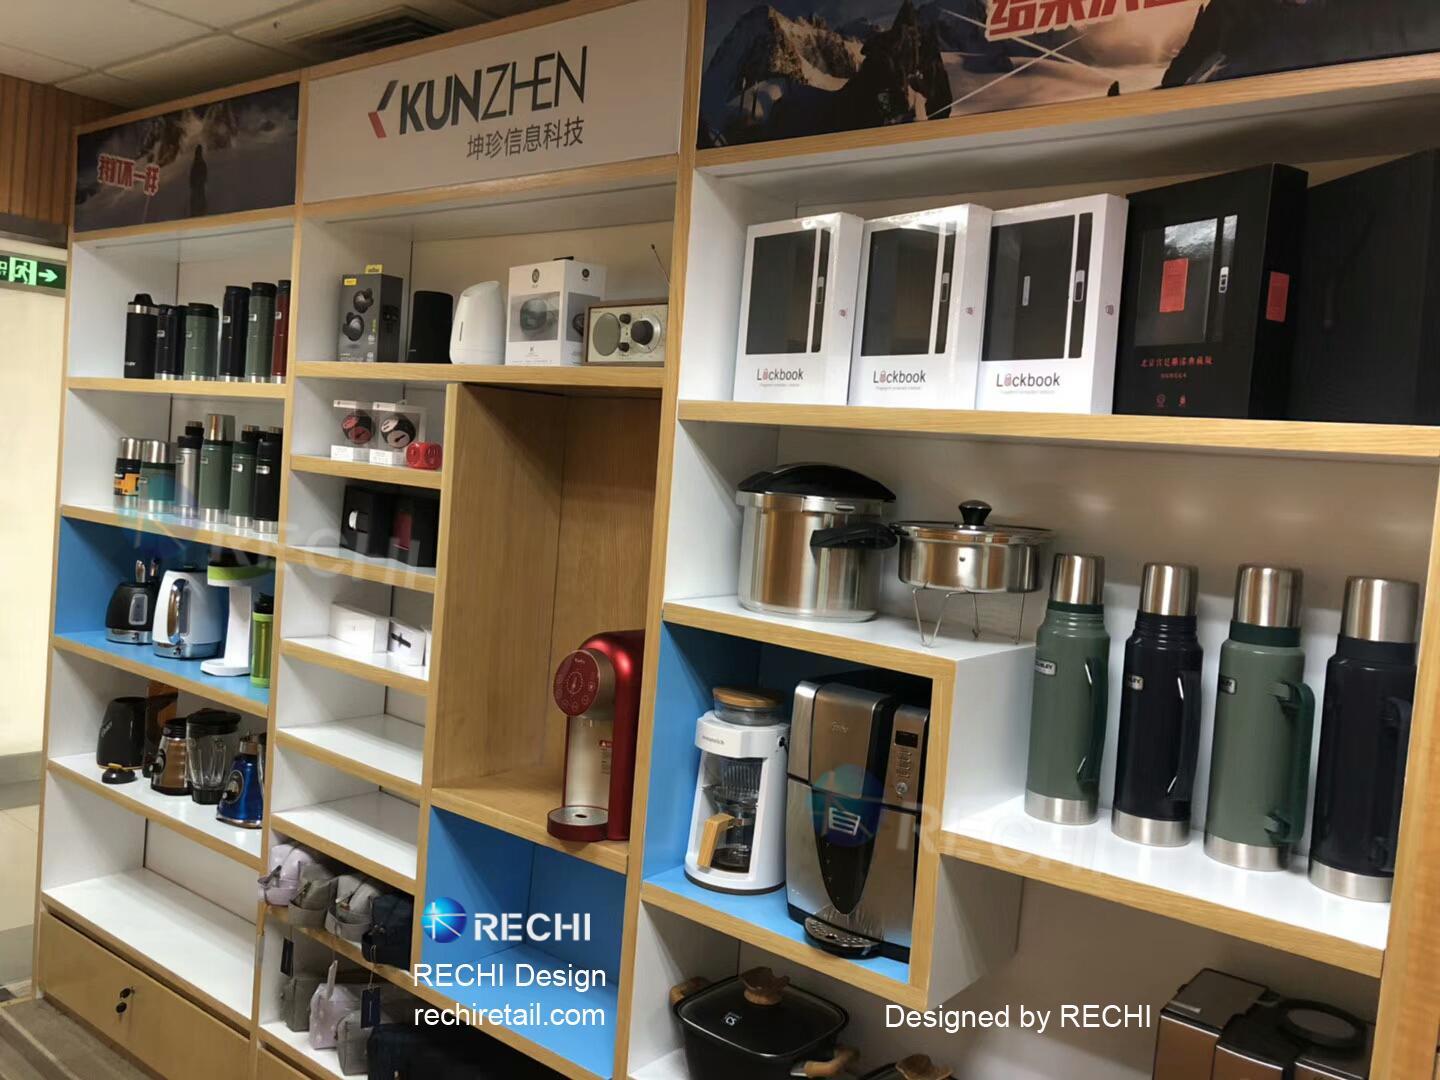 RECHI Lifestyle Products Display Showcase For Kunzhen